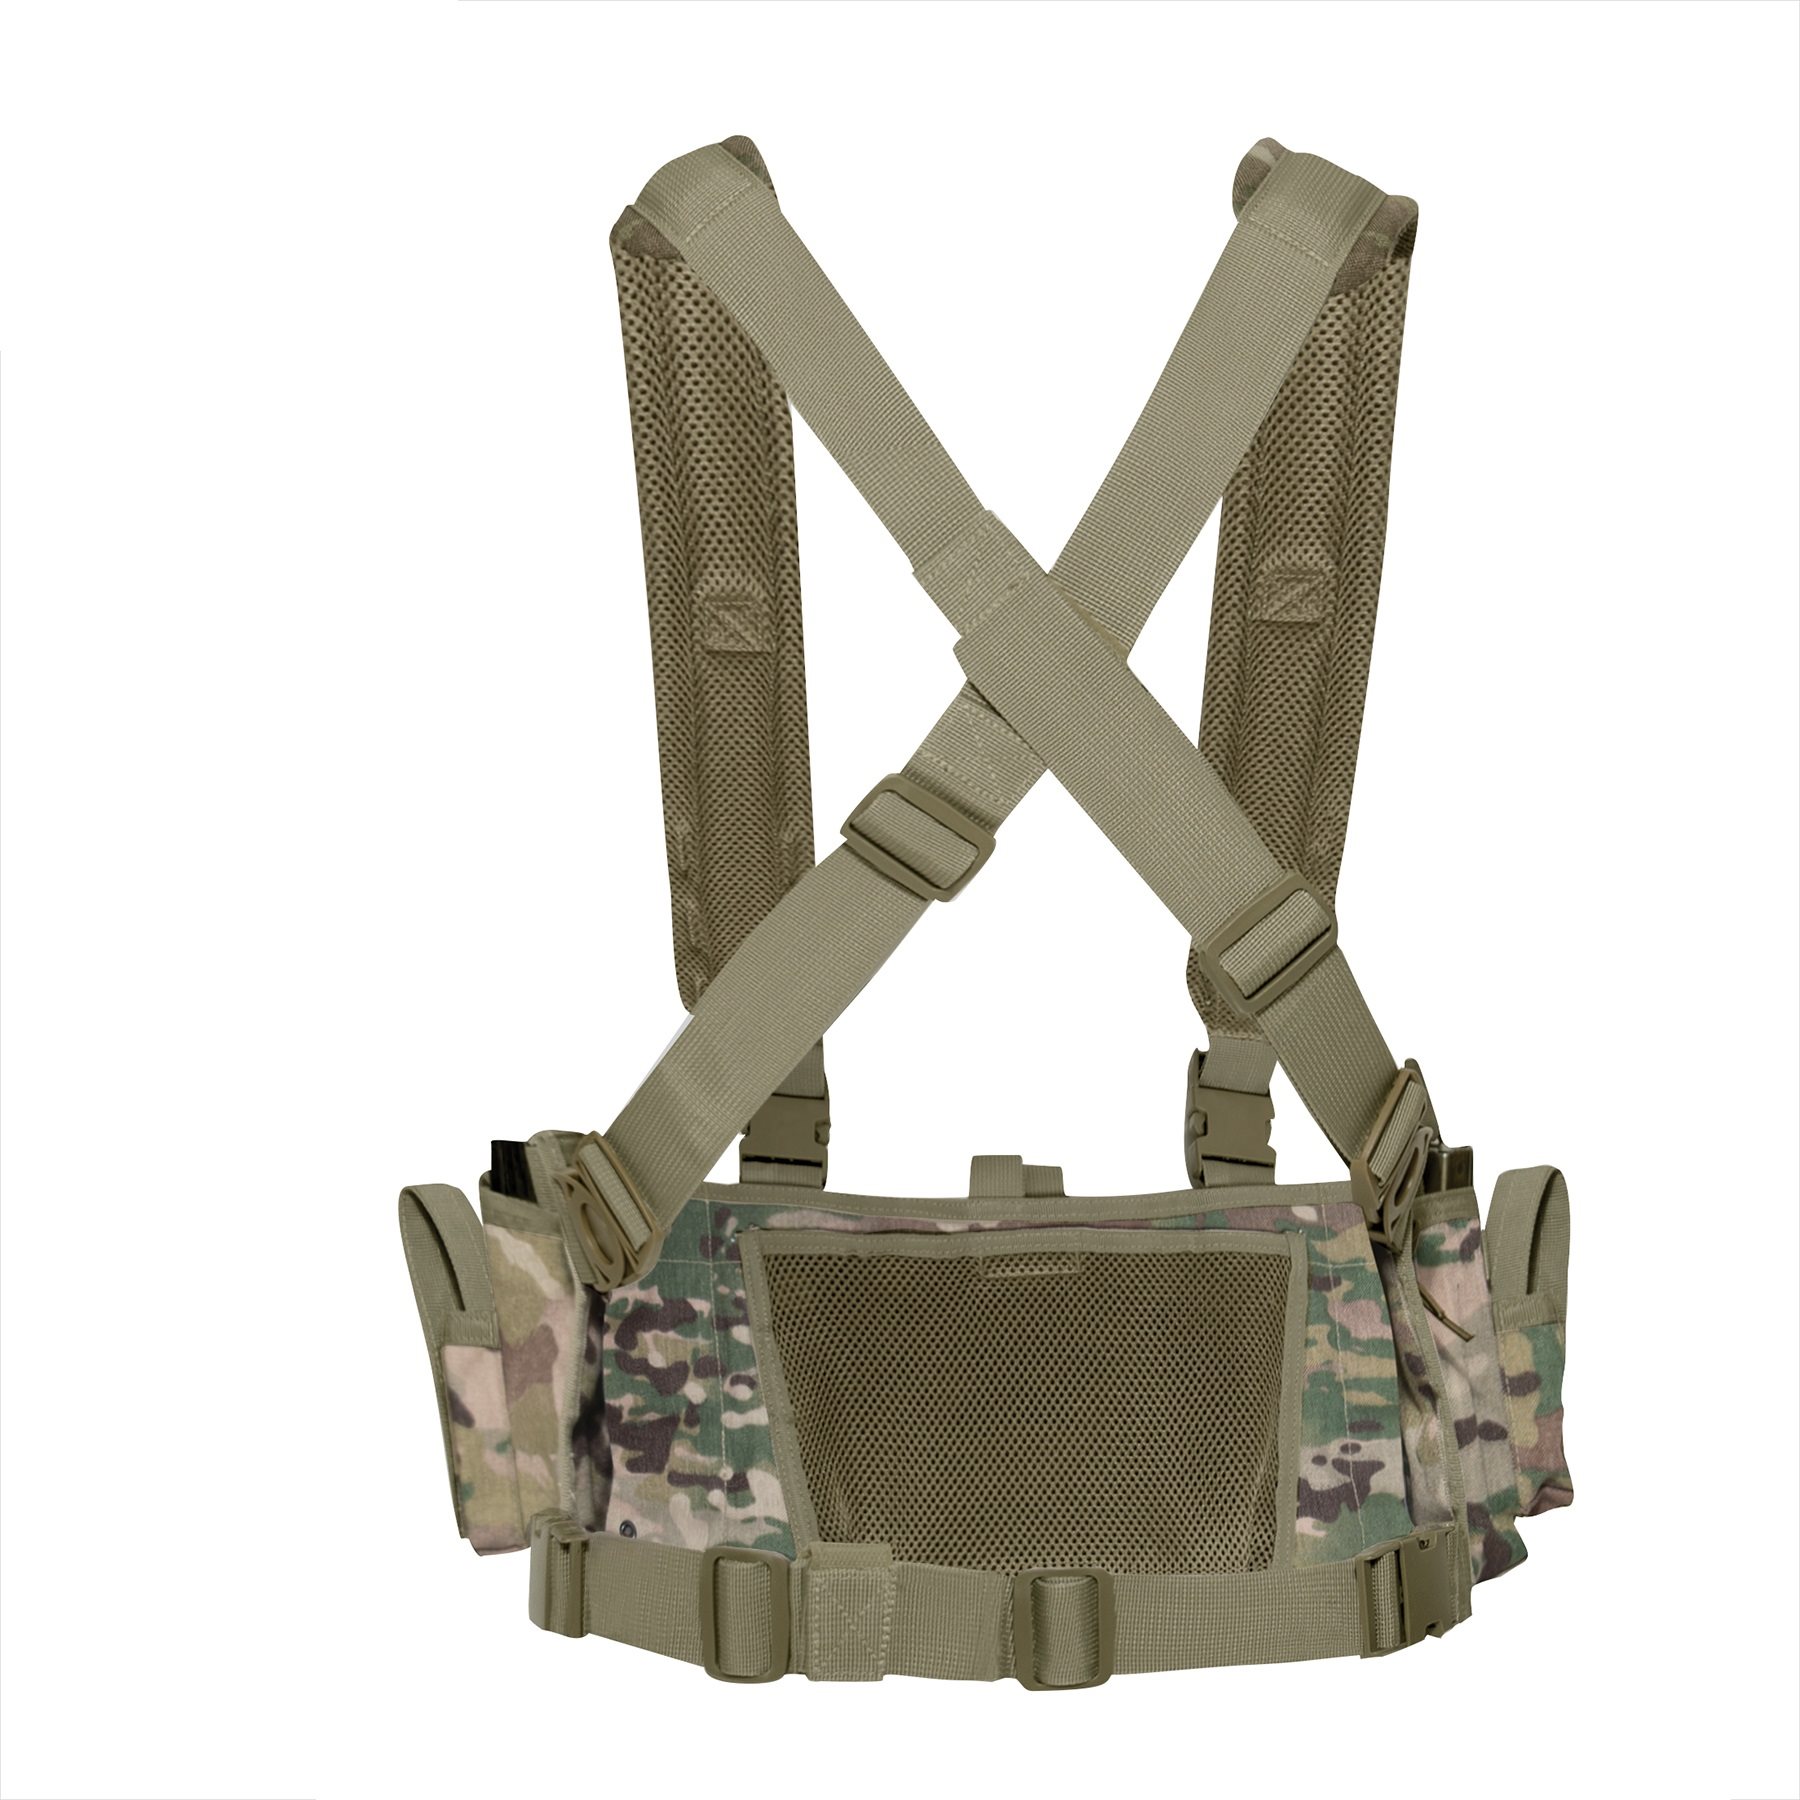 ROTHCO Operators Tactical Chest Rig MULTICAM | MILITARY RANGE